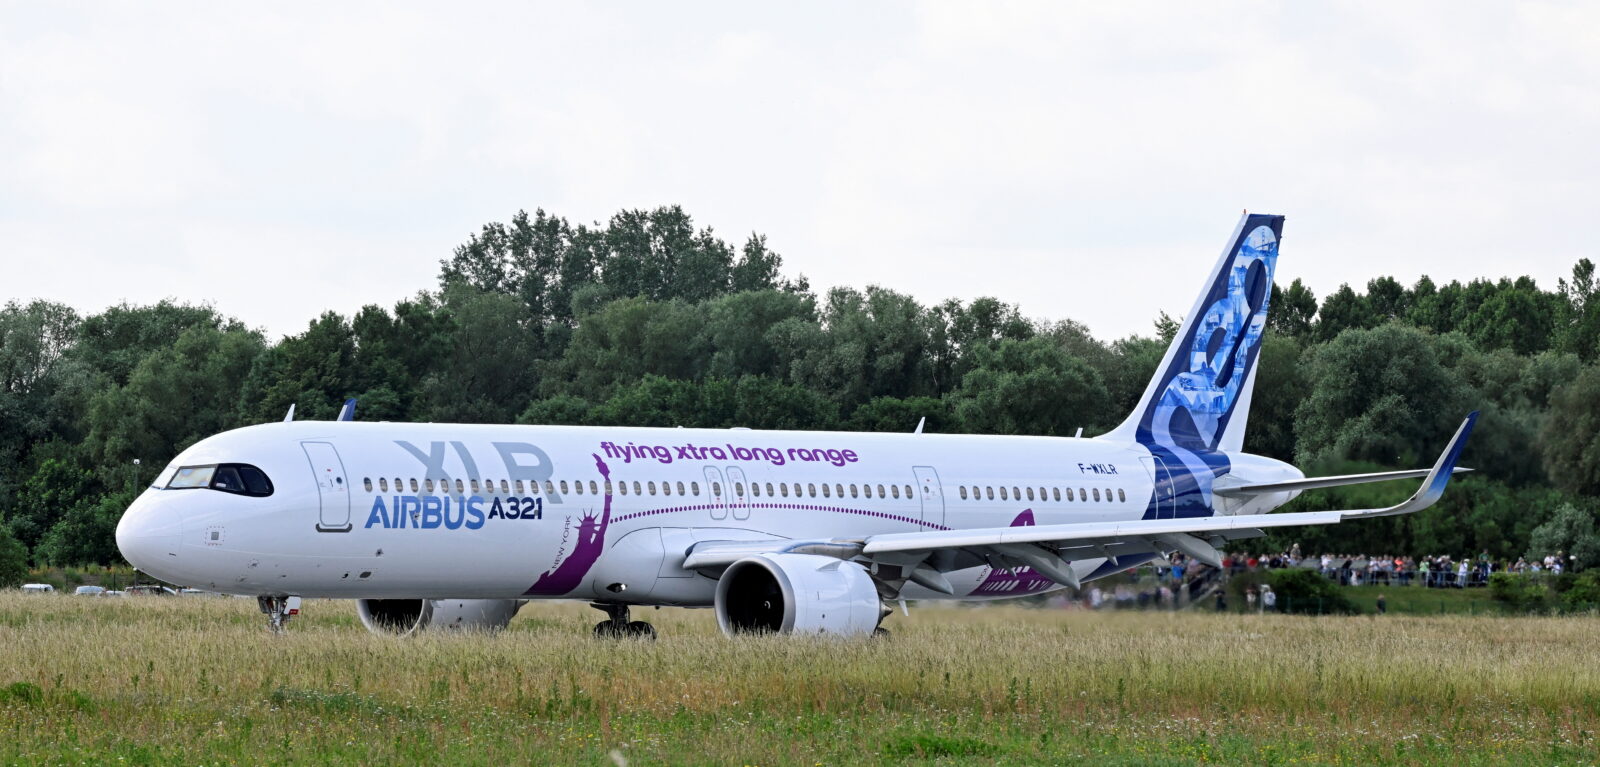 Airbus A321XLR takes off for its maiden flight at Hamburg-Finkenwerder Airport